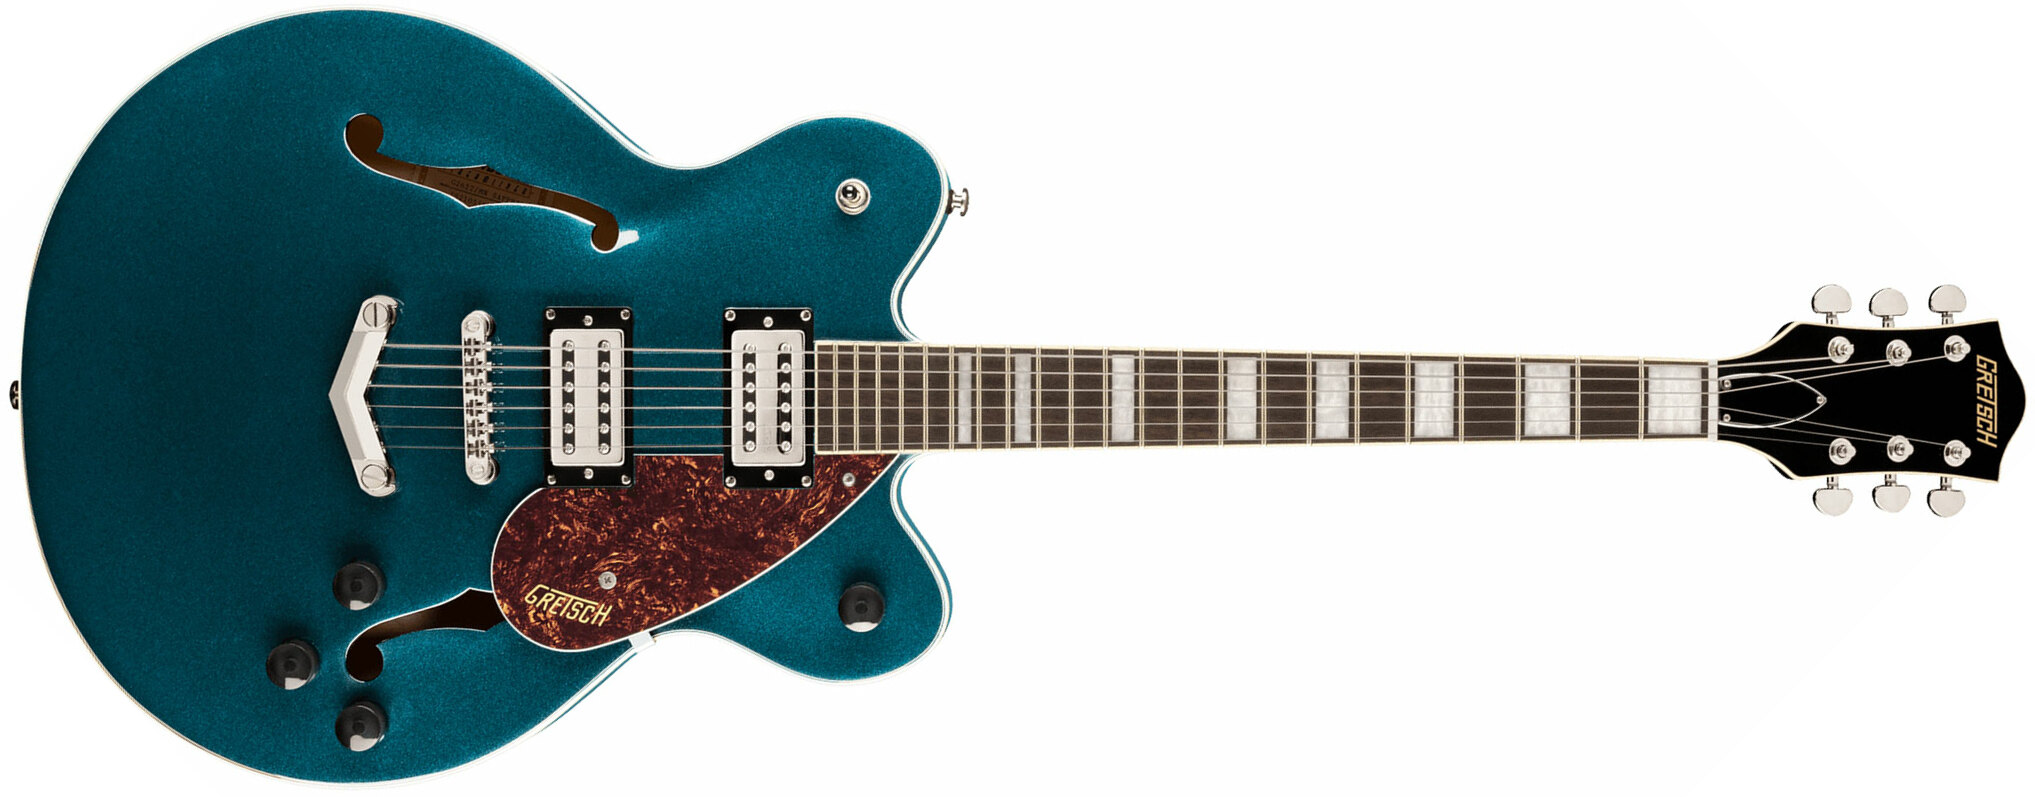 Gretsch G2622 Streamliner Center Block Dc V-stoptail Hh Ht Lau - Midnight Sapphire - Double cut electric guitar - Main picture